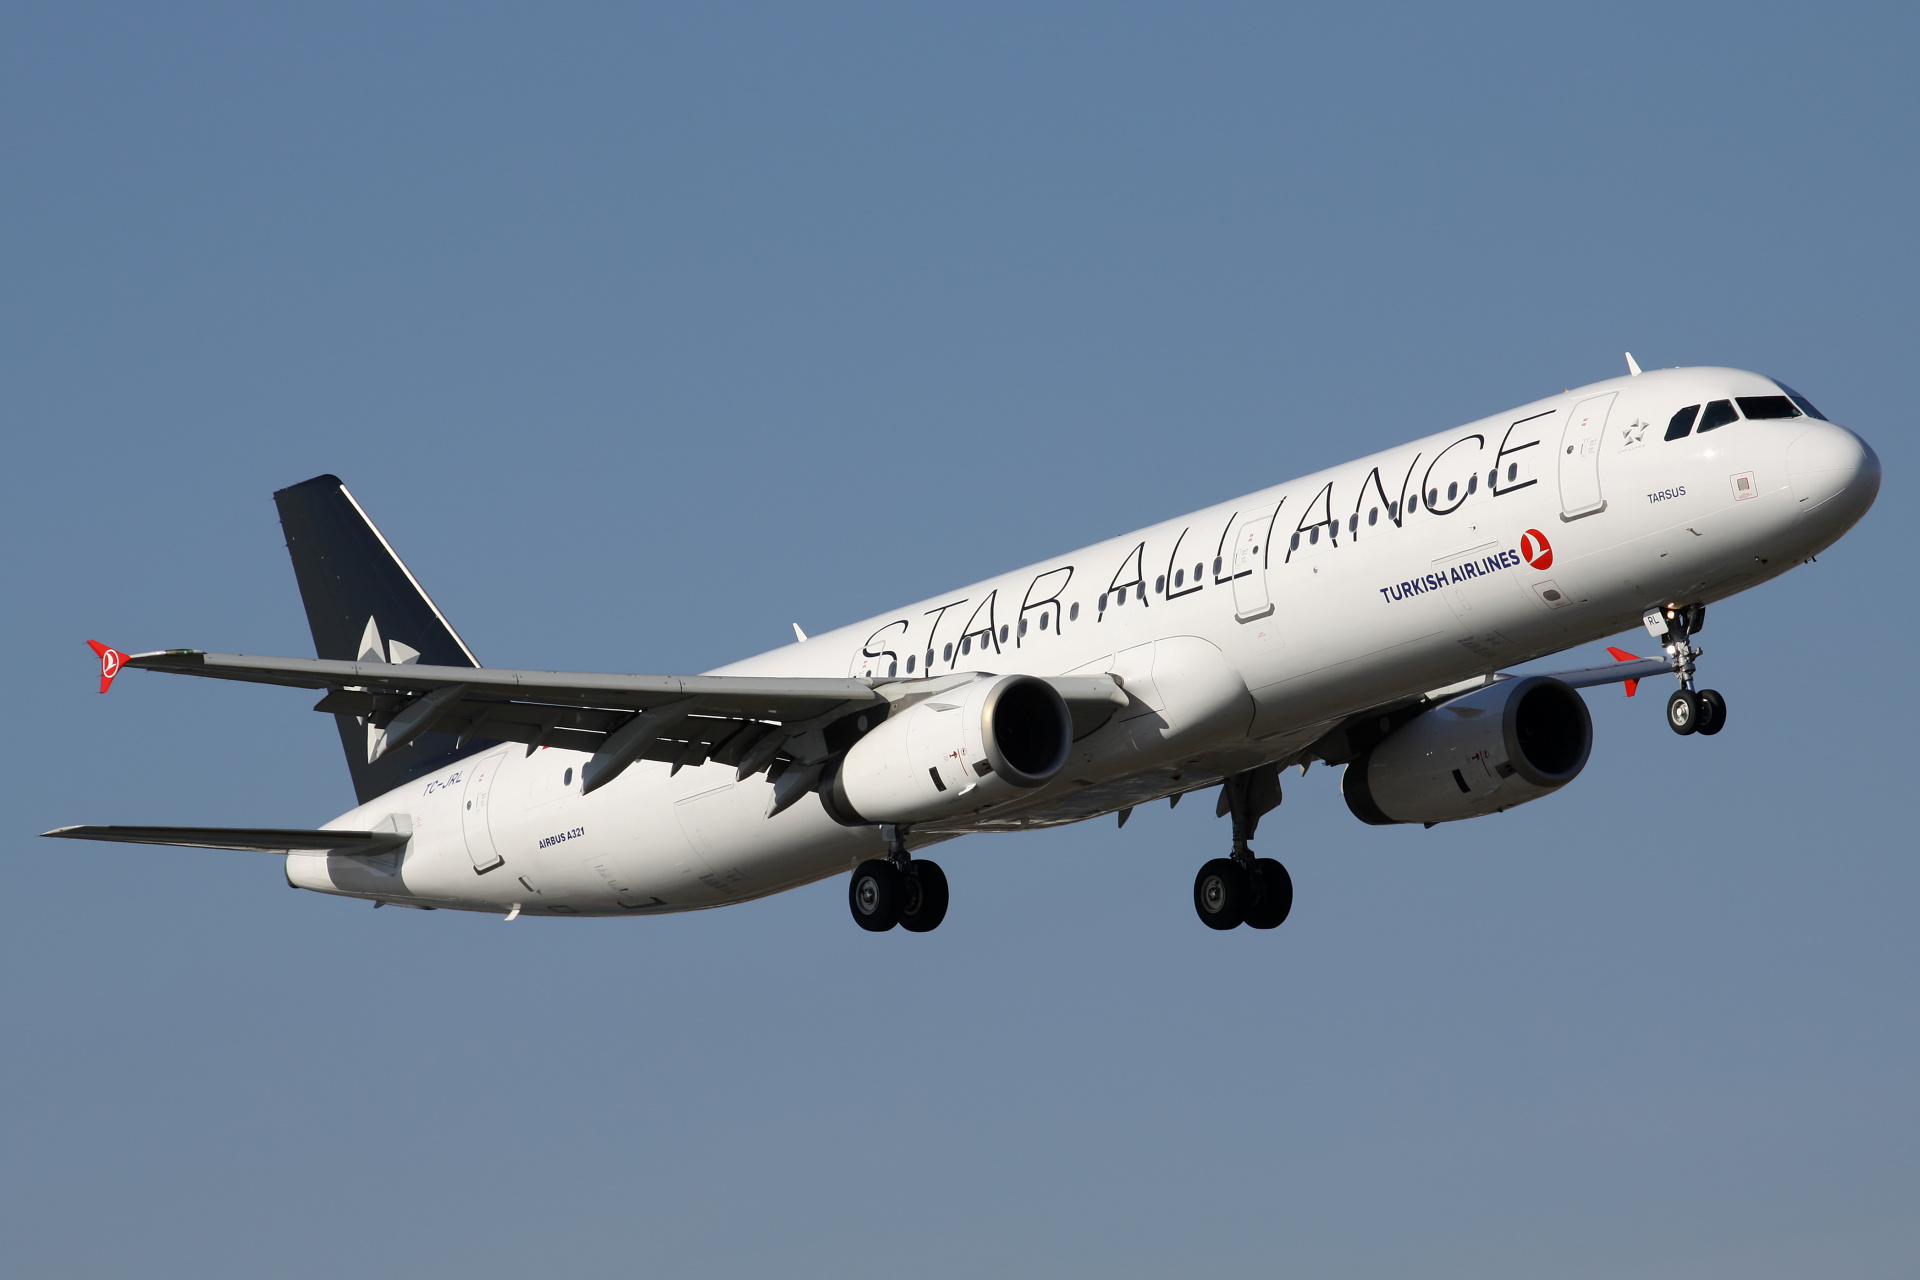 TC-JRL (Star Alliance livery) (Aircraft » EPWA Spotting » Airbus A321-200 » THY Turkish Airlines)